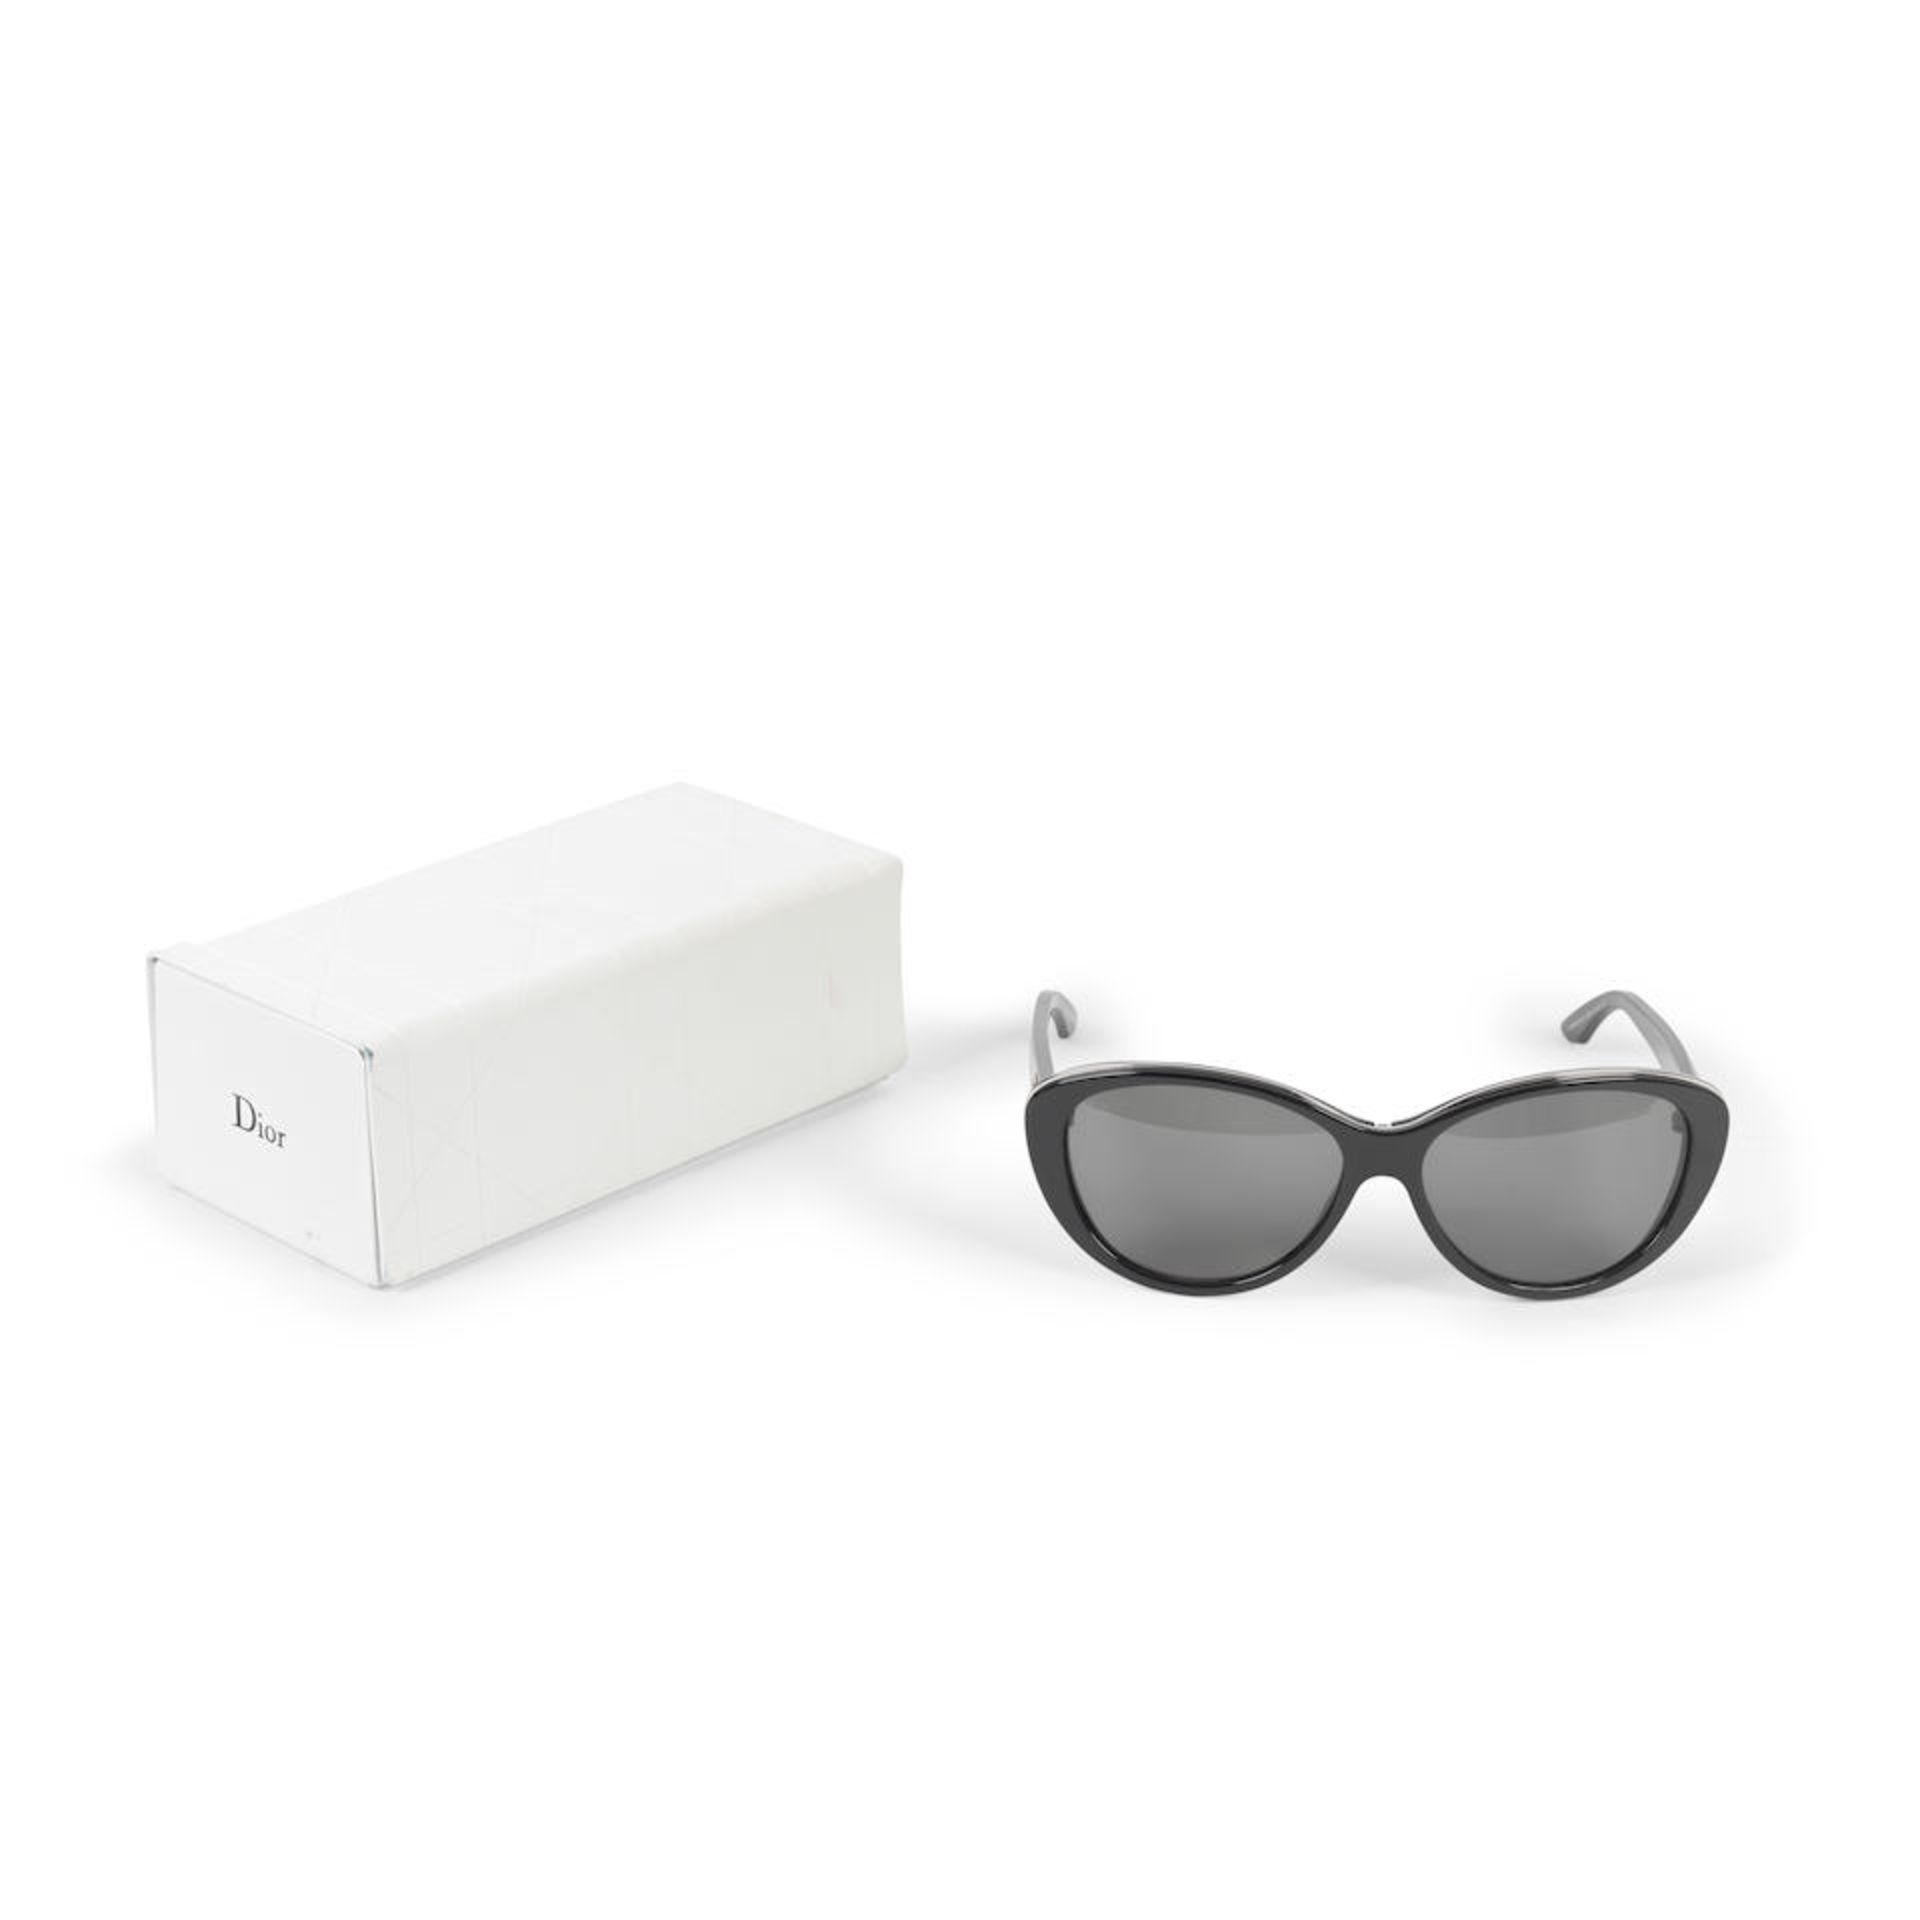 Christian Dior: a Pair of Black Sunglasses (Includes dust bag and case)